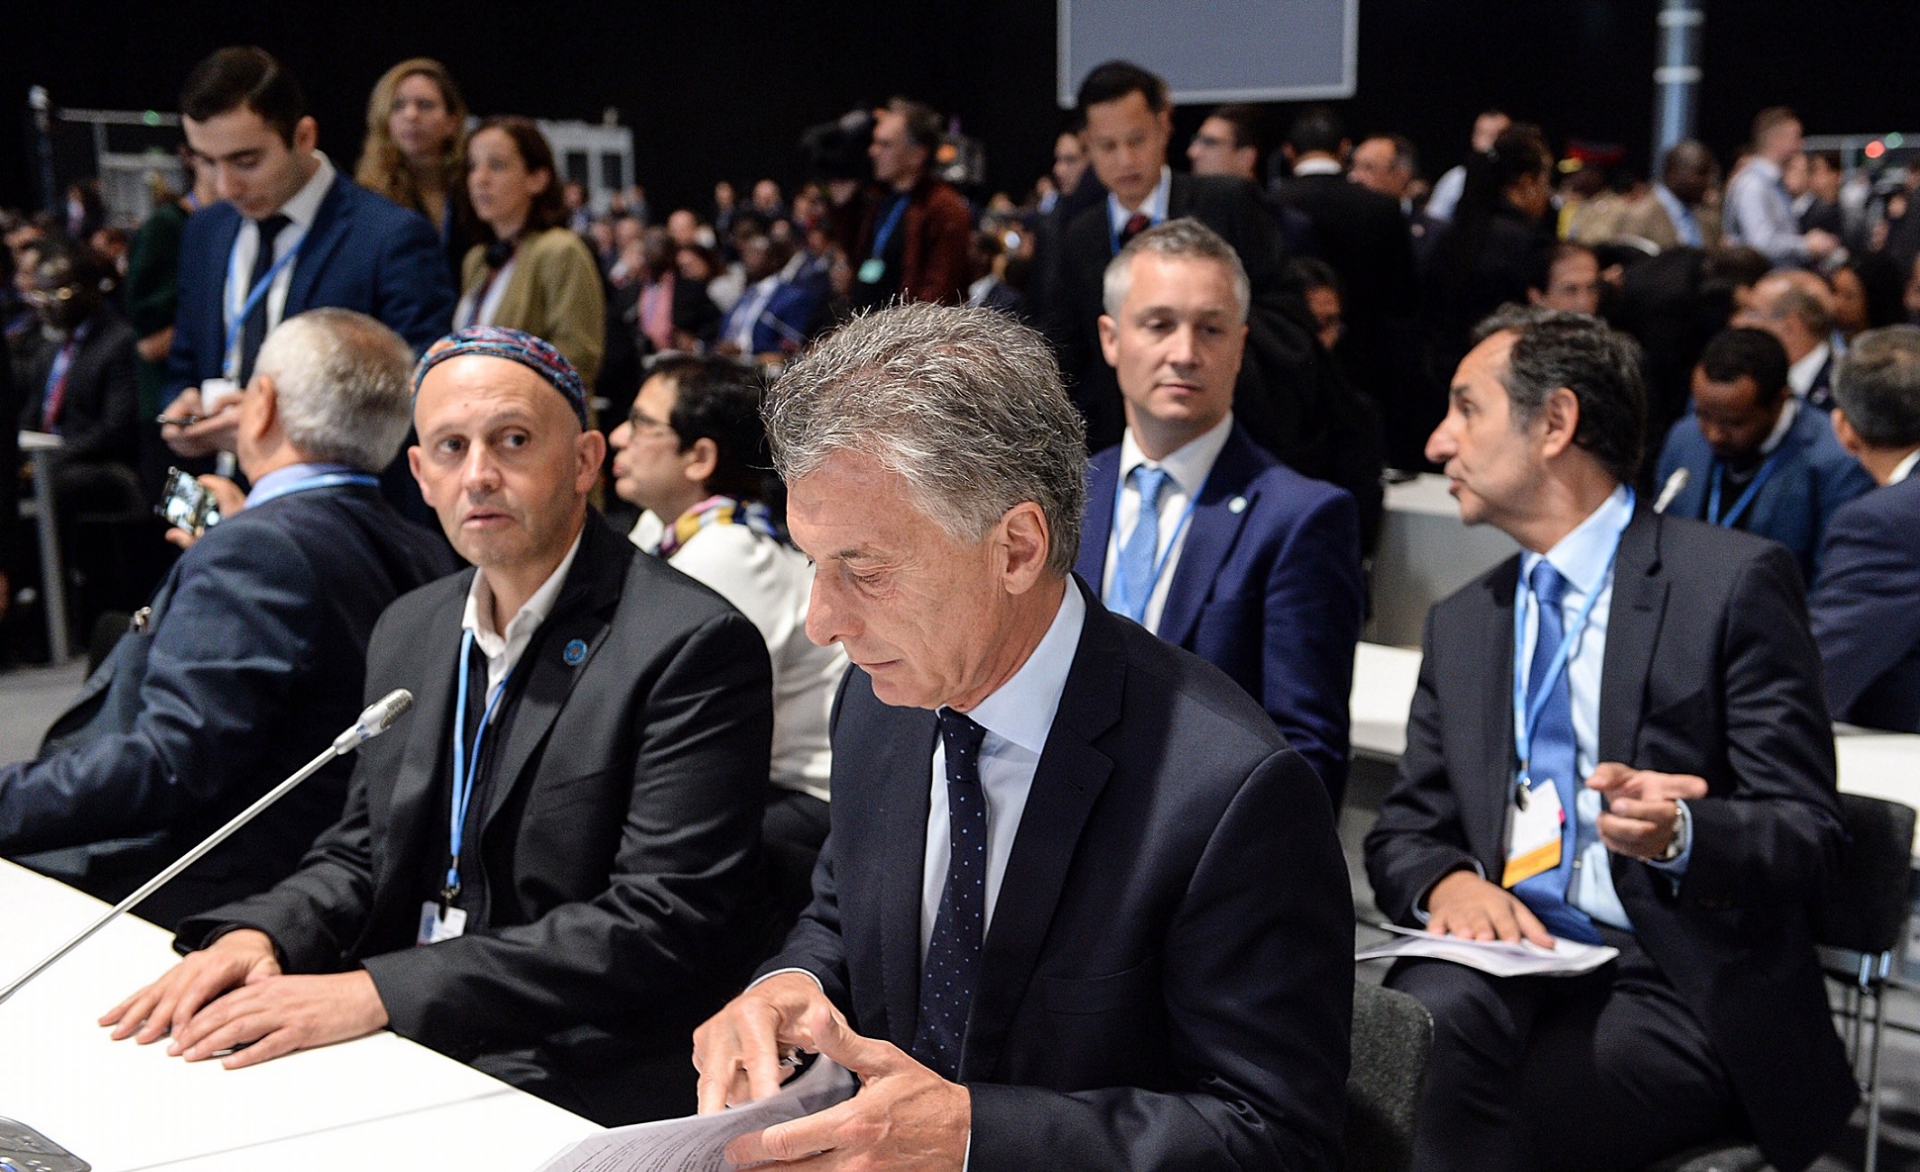 Macri at COP 25: “We still have an opportunity to change. Future societies will value what we’ve done to build a safer, cleaner and more sustainable planet”